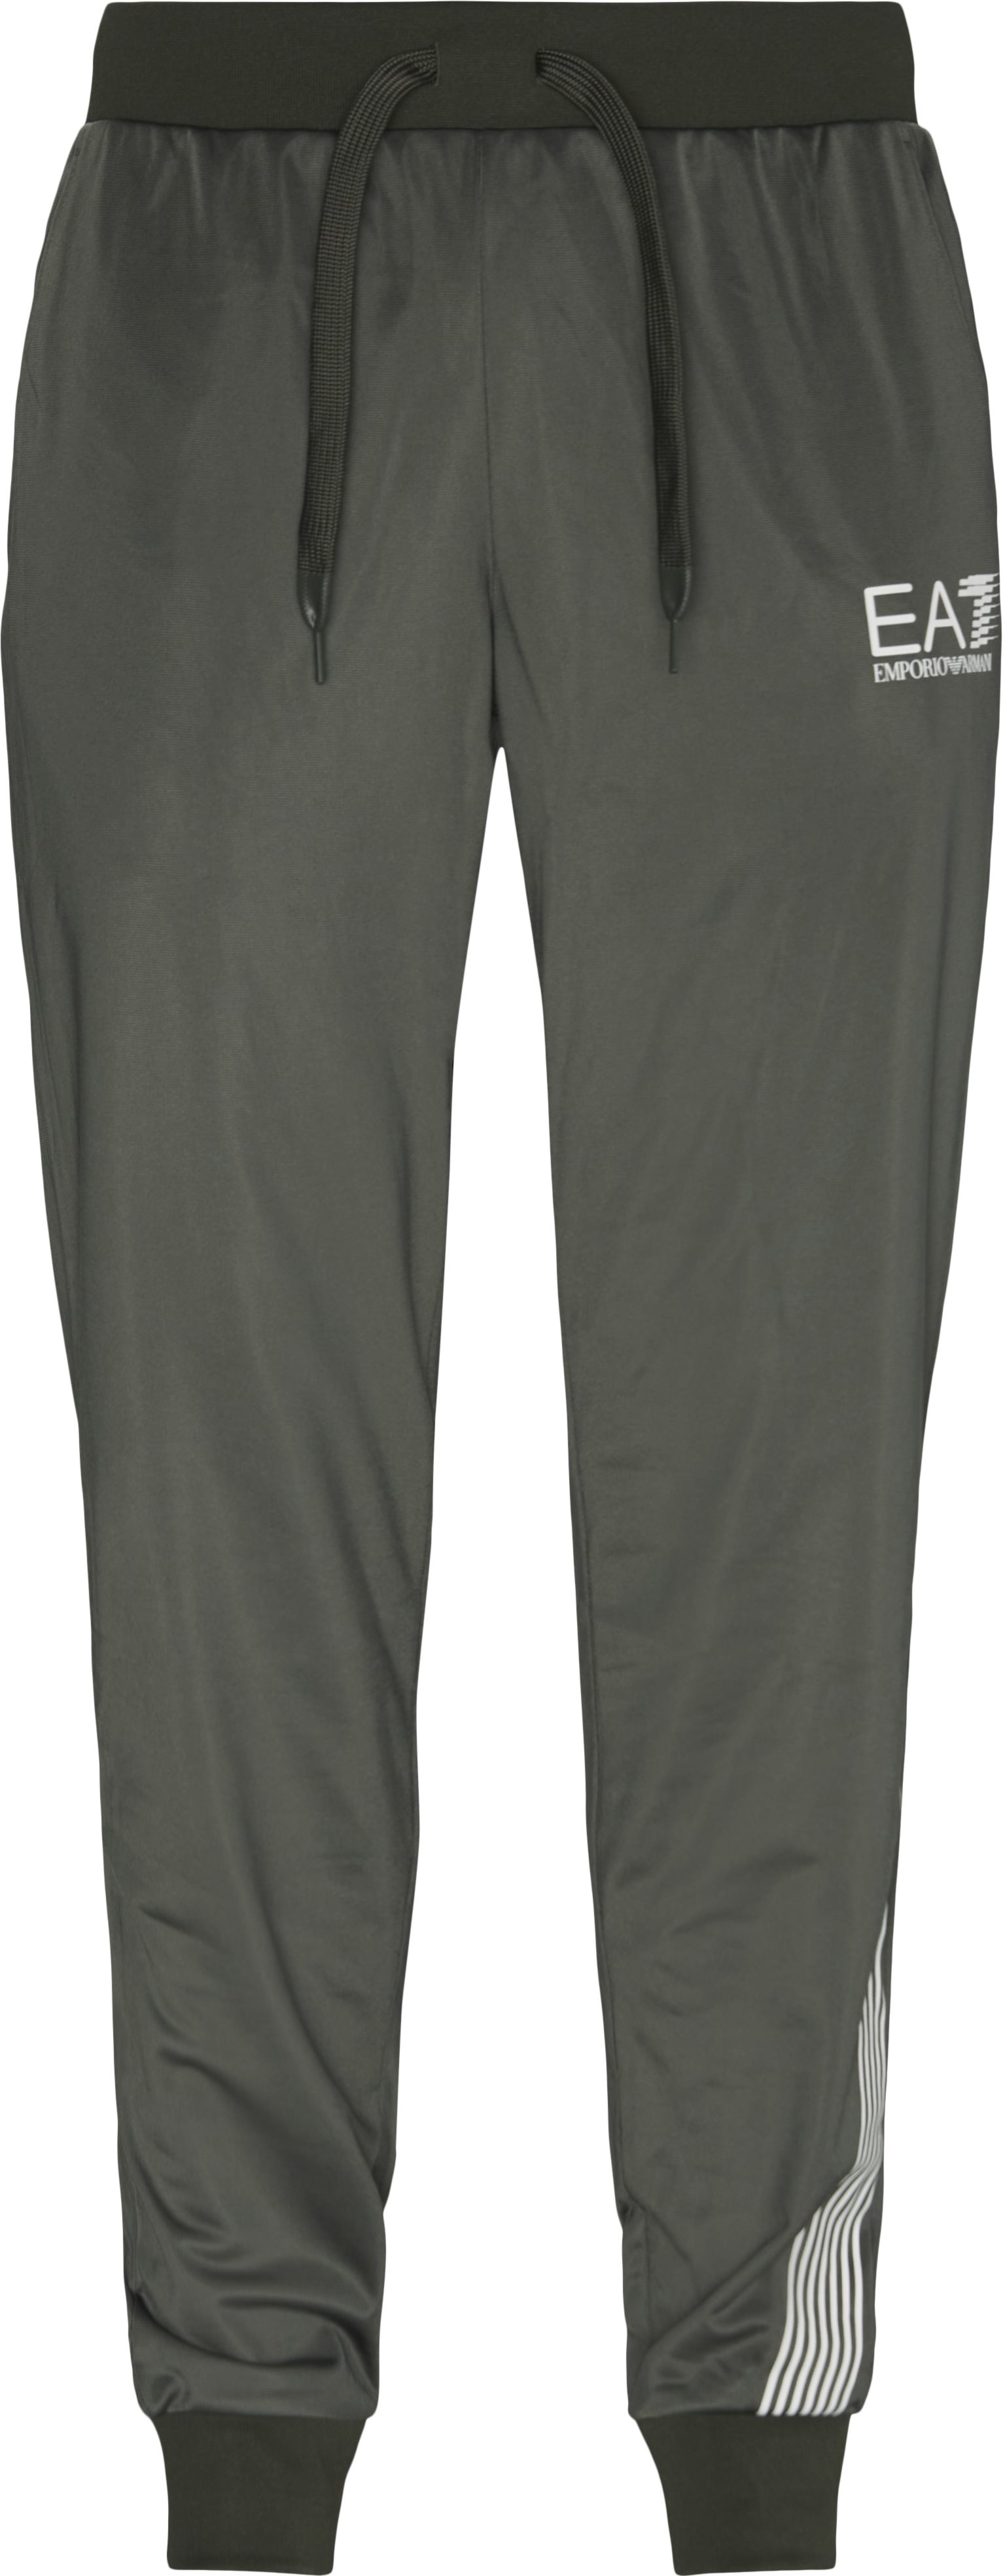 Trousers - Army